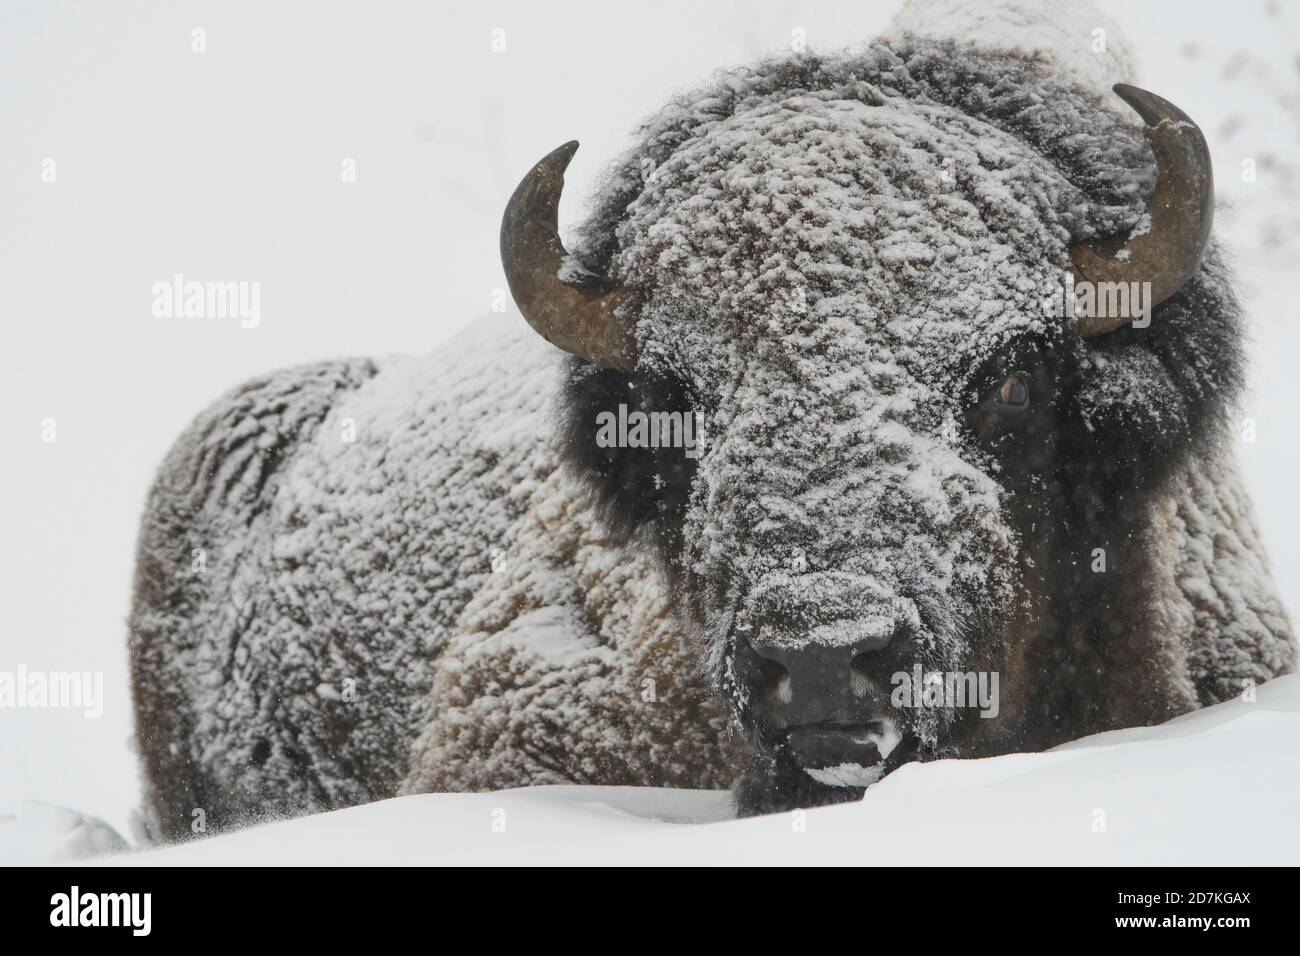 Bull Bison (Bison bison) in winter, Yellowstone National Park, Wyoming Stock Photo